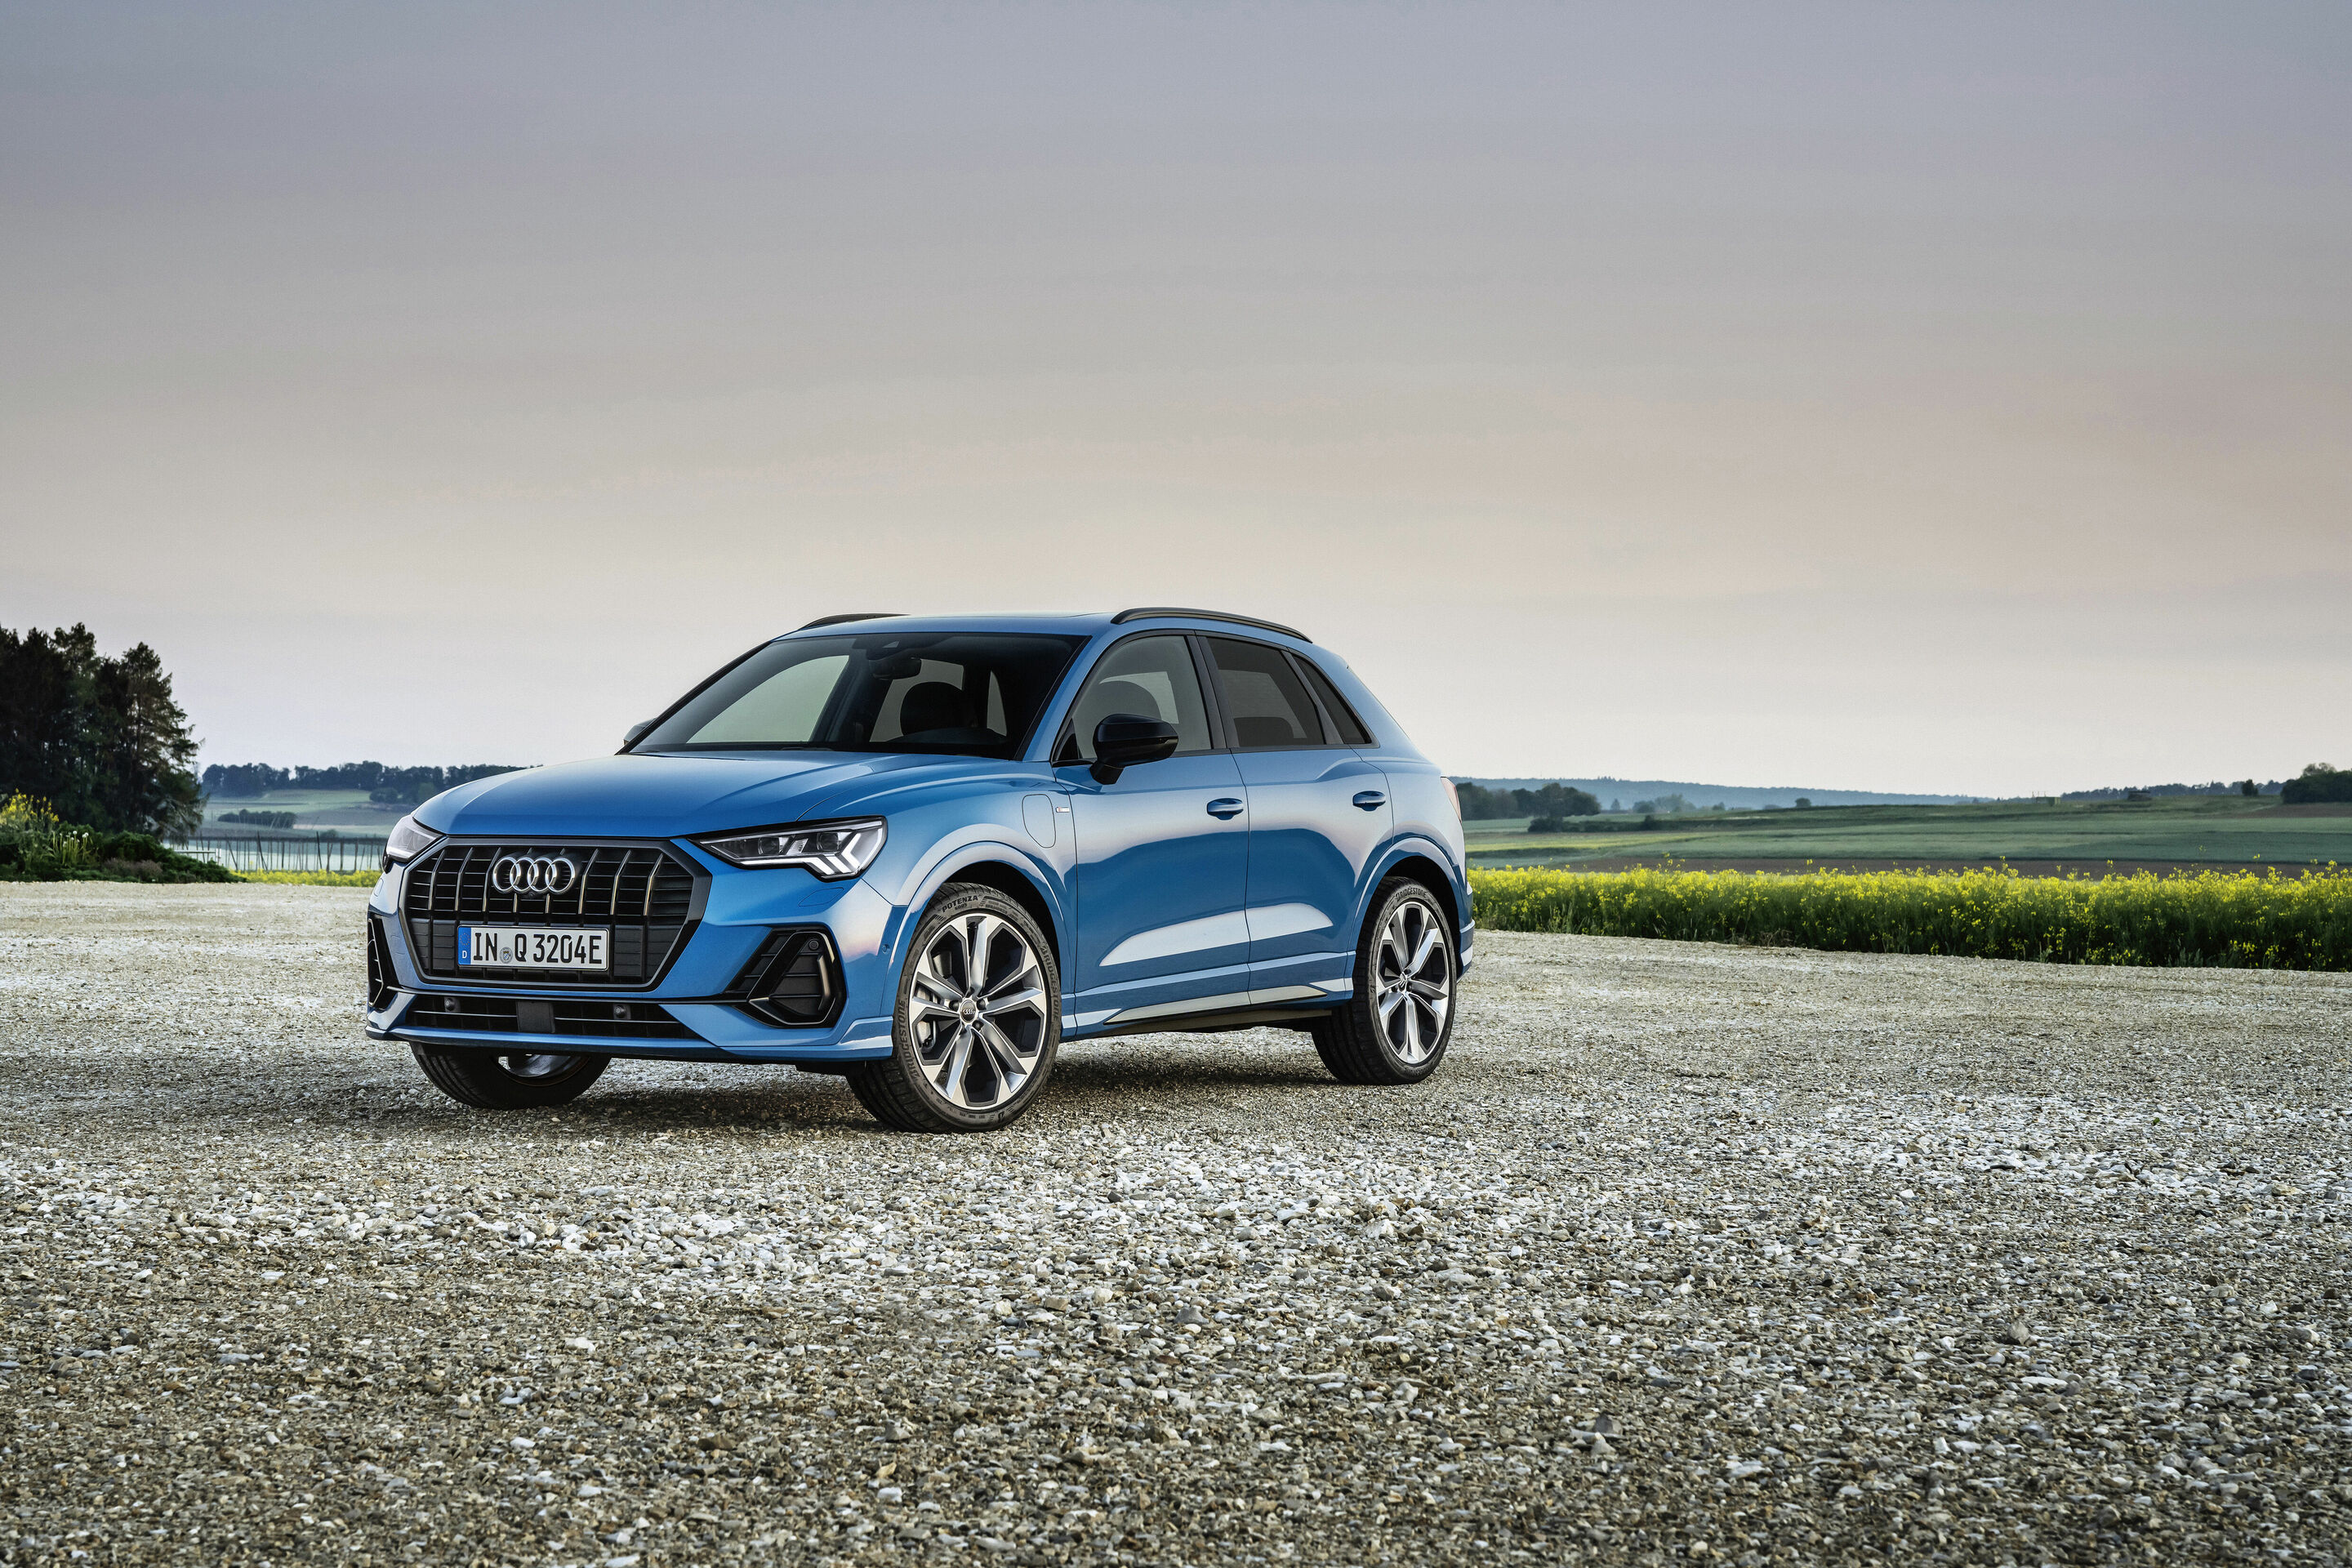 High efficiency and outstanding driving pleasure: The Audi Q3 as a